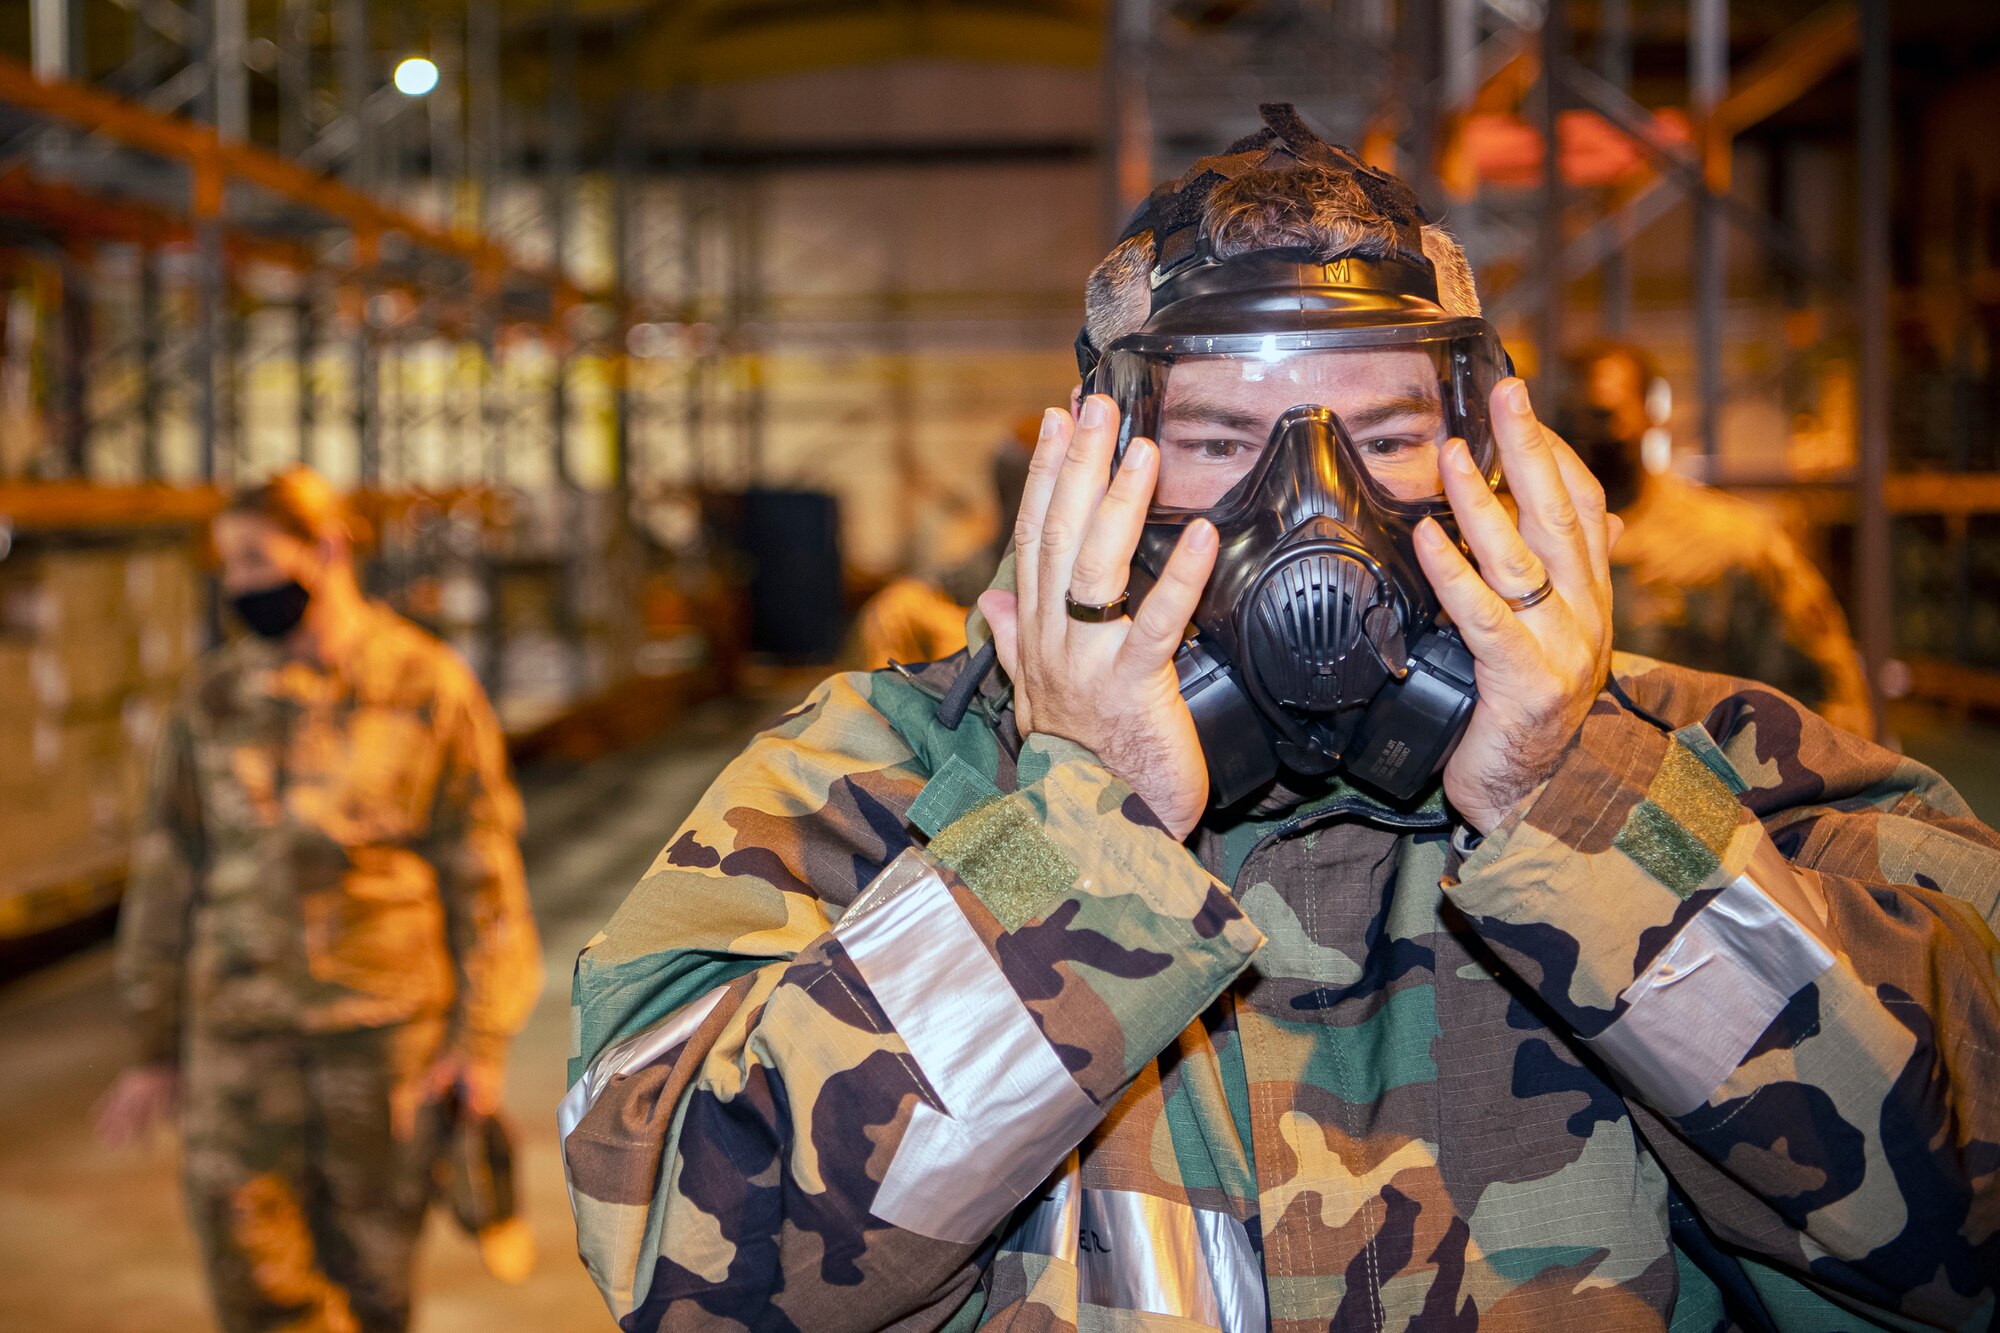 U.S. Air Force Col. Brian Filler, right, 501st Combat Support Wing commander, performs a seal check on his gas mask during Ability to Survive and Operate training at RAF Alconbury, England, Aug. 27, 2021. Filler along with other Airmen from the 501st CSW participated in the ATSO rodeo to get a refresher on how to properly utilize their MOPP gear in a potential chemical environment. (U.S. Air Force photo by Senior Airman Eugene Oliver)